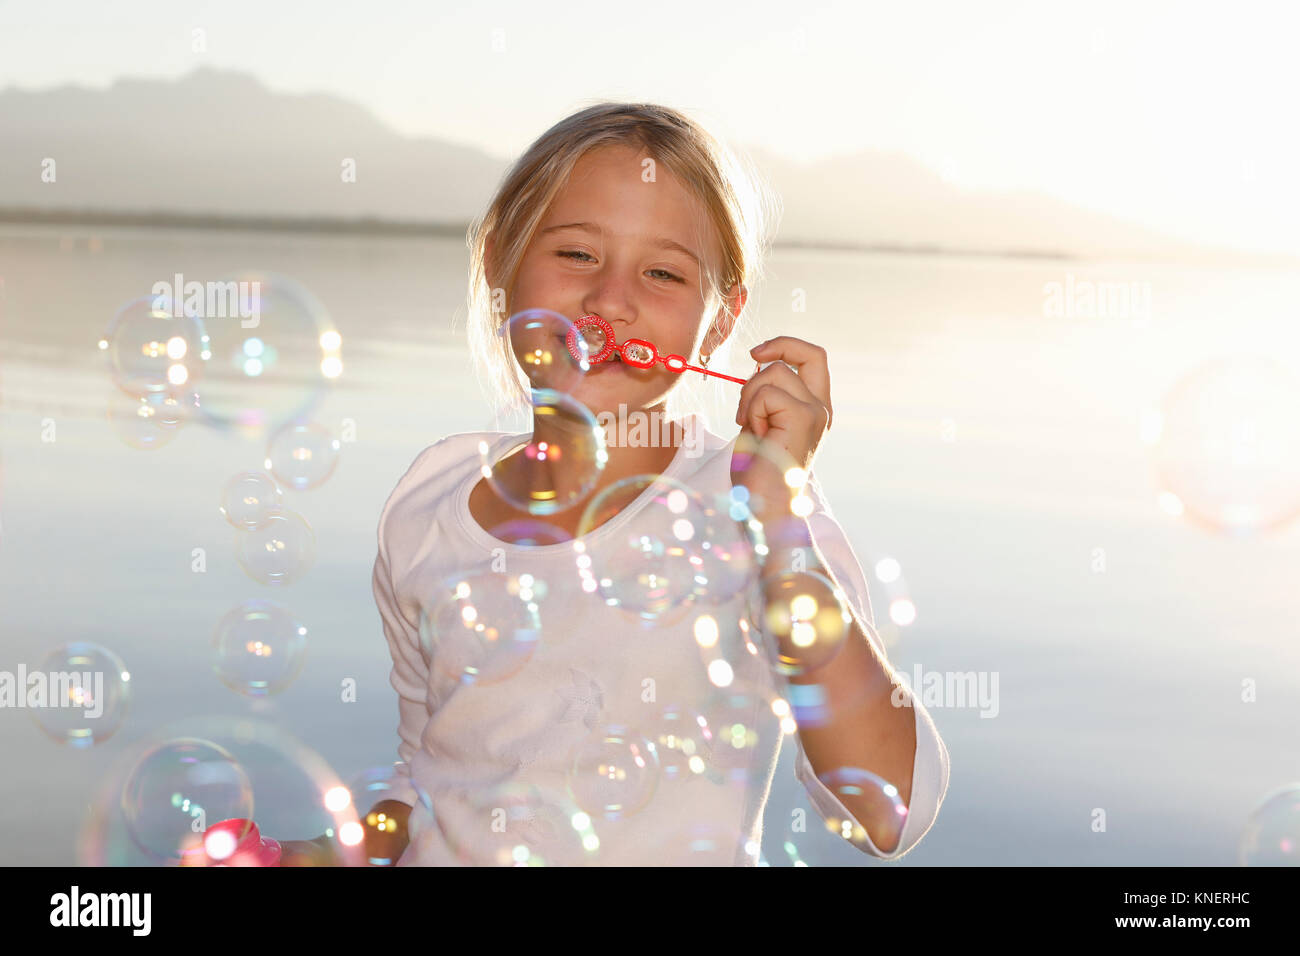 Young girl, outdoors, blowing bubbles Stock Photo